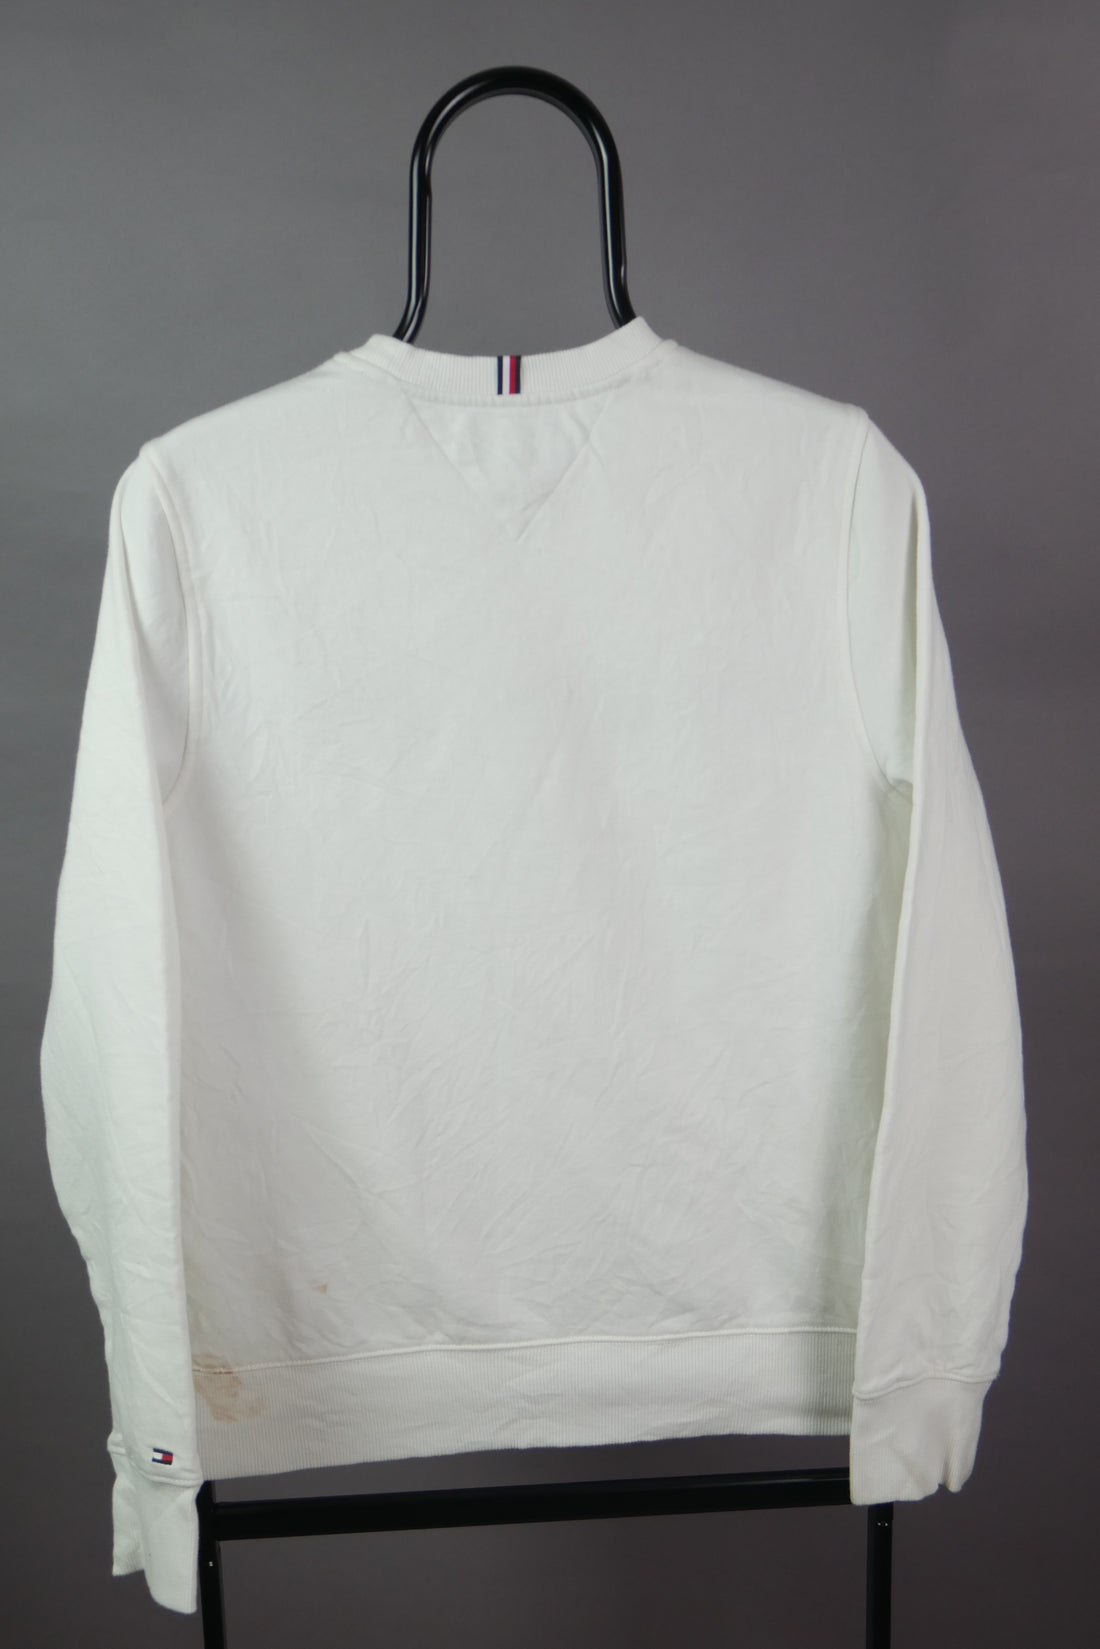 The Tommy Hilfiger Sweater (XS)